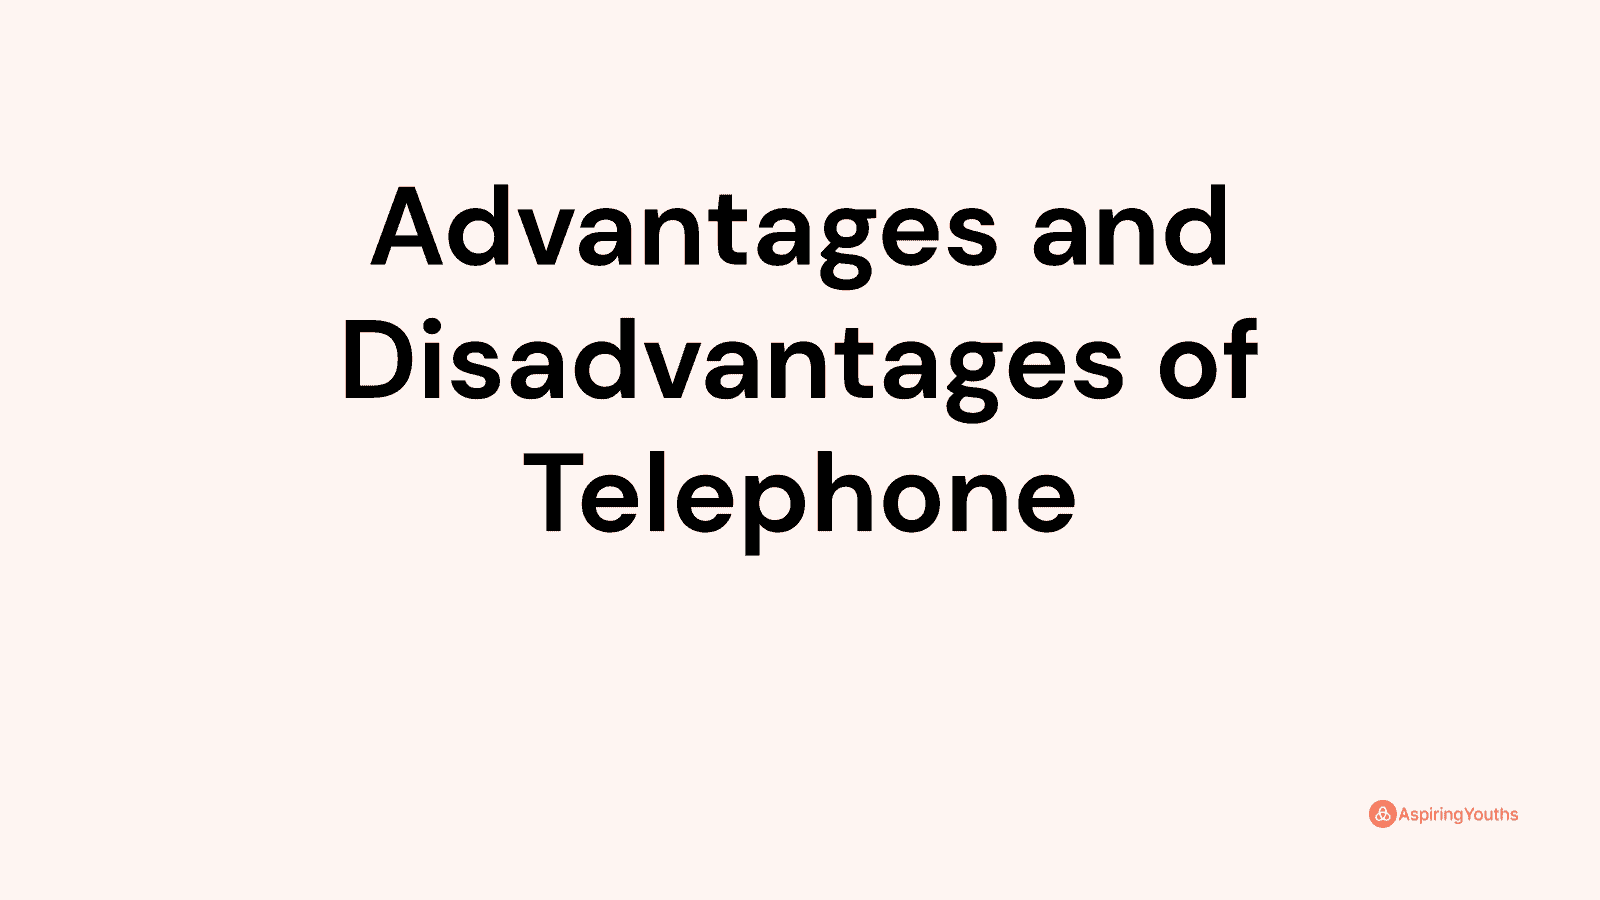 Advantages and disadvantages of Telephone